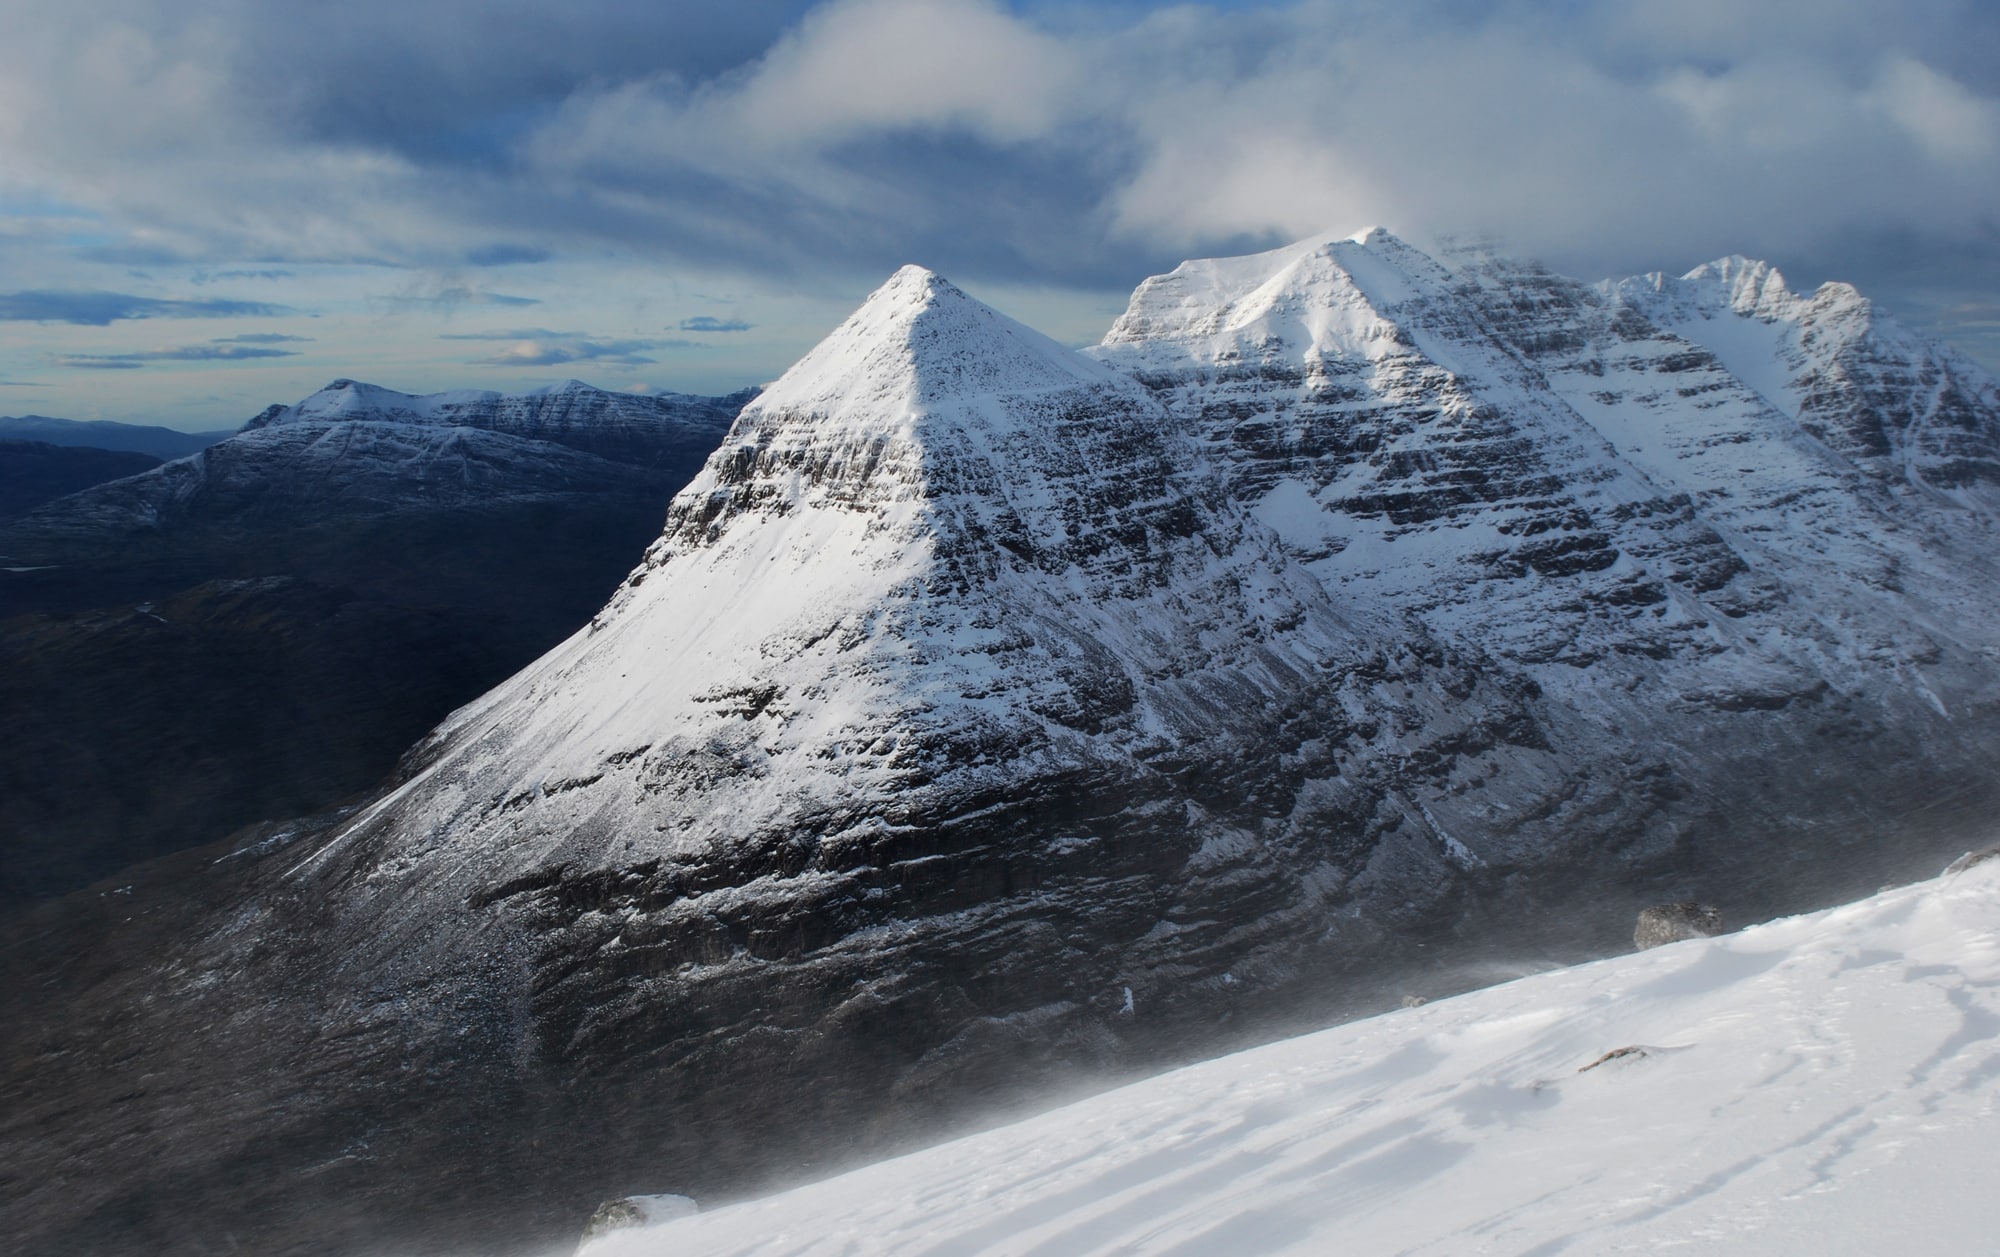 Photo of Torridon in the Scottish Highlands in winter